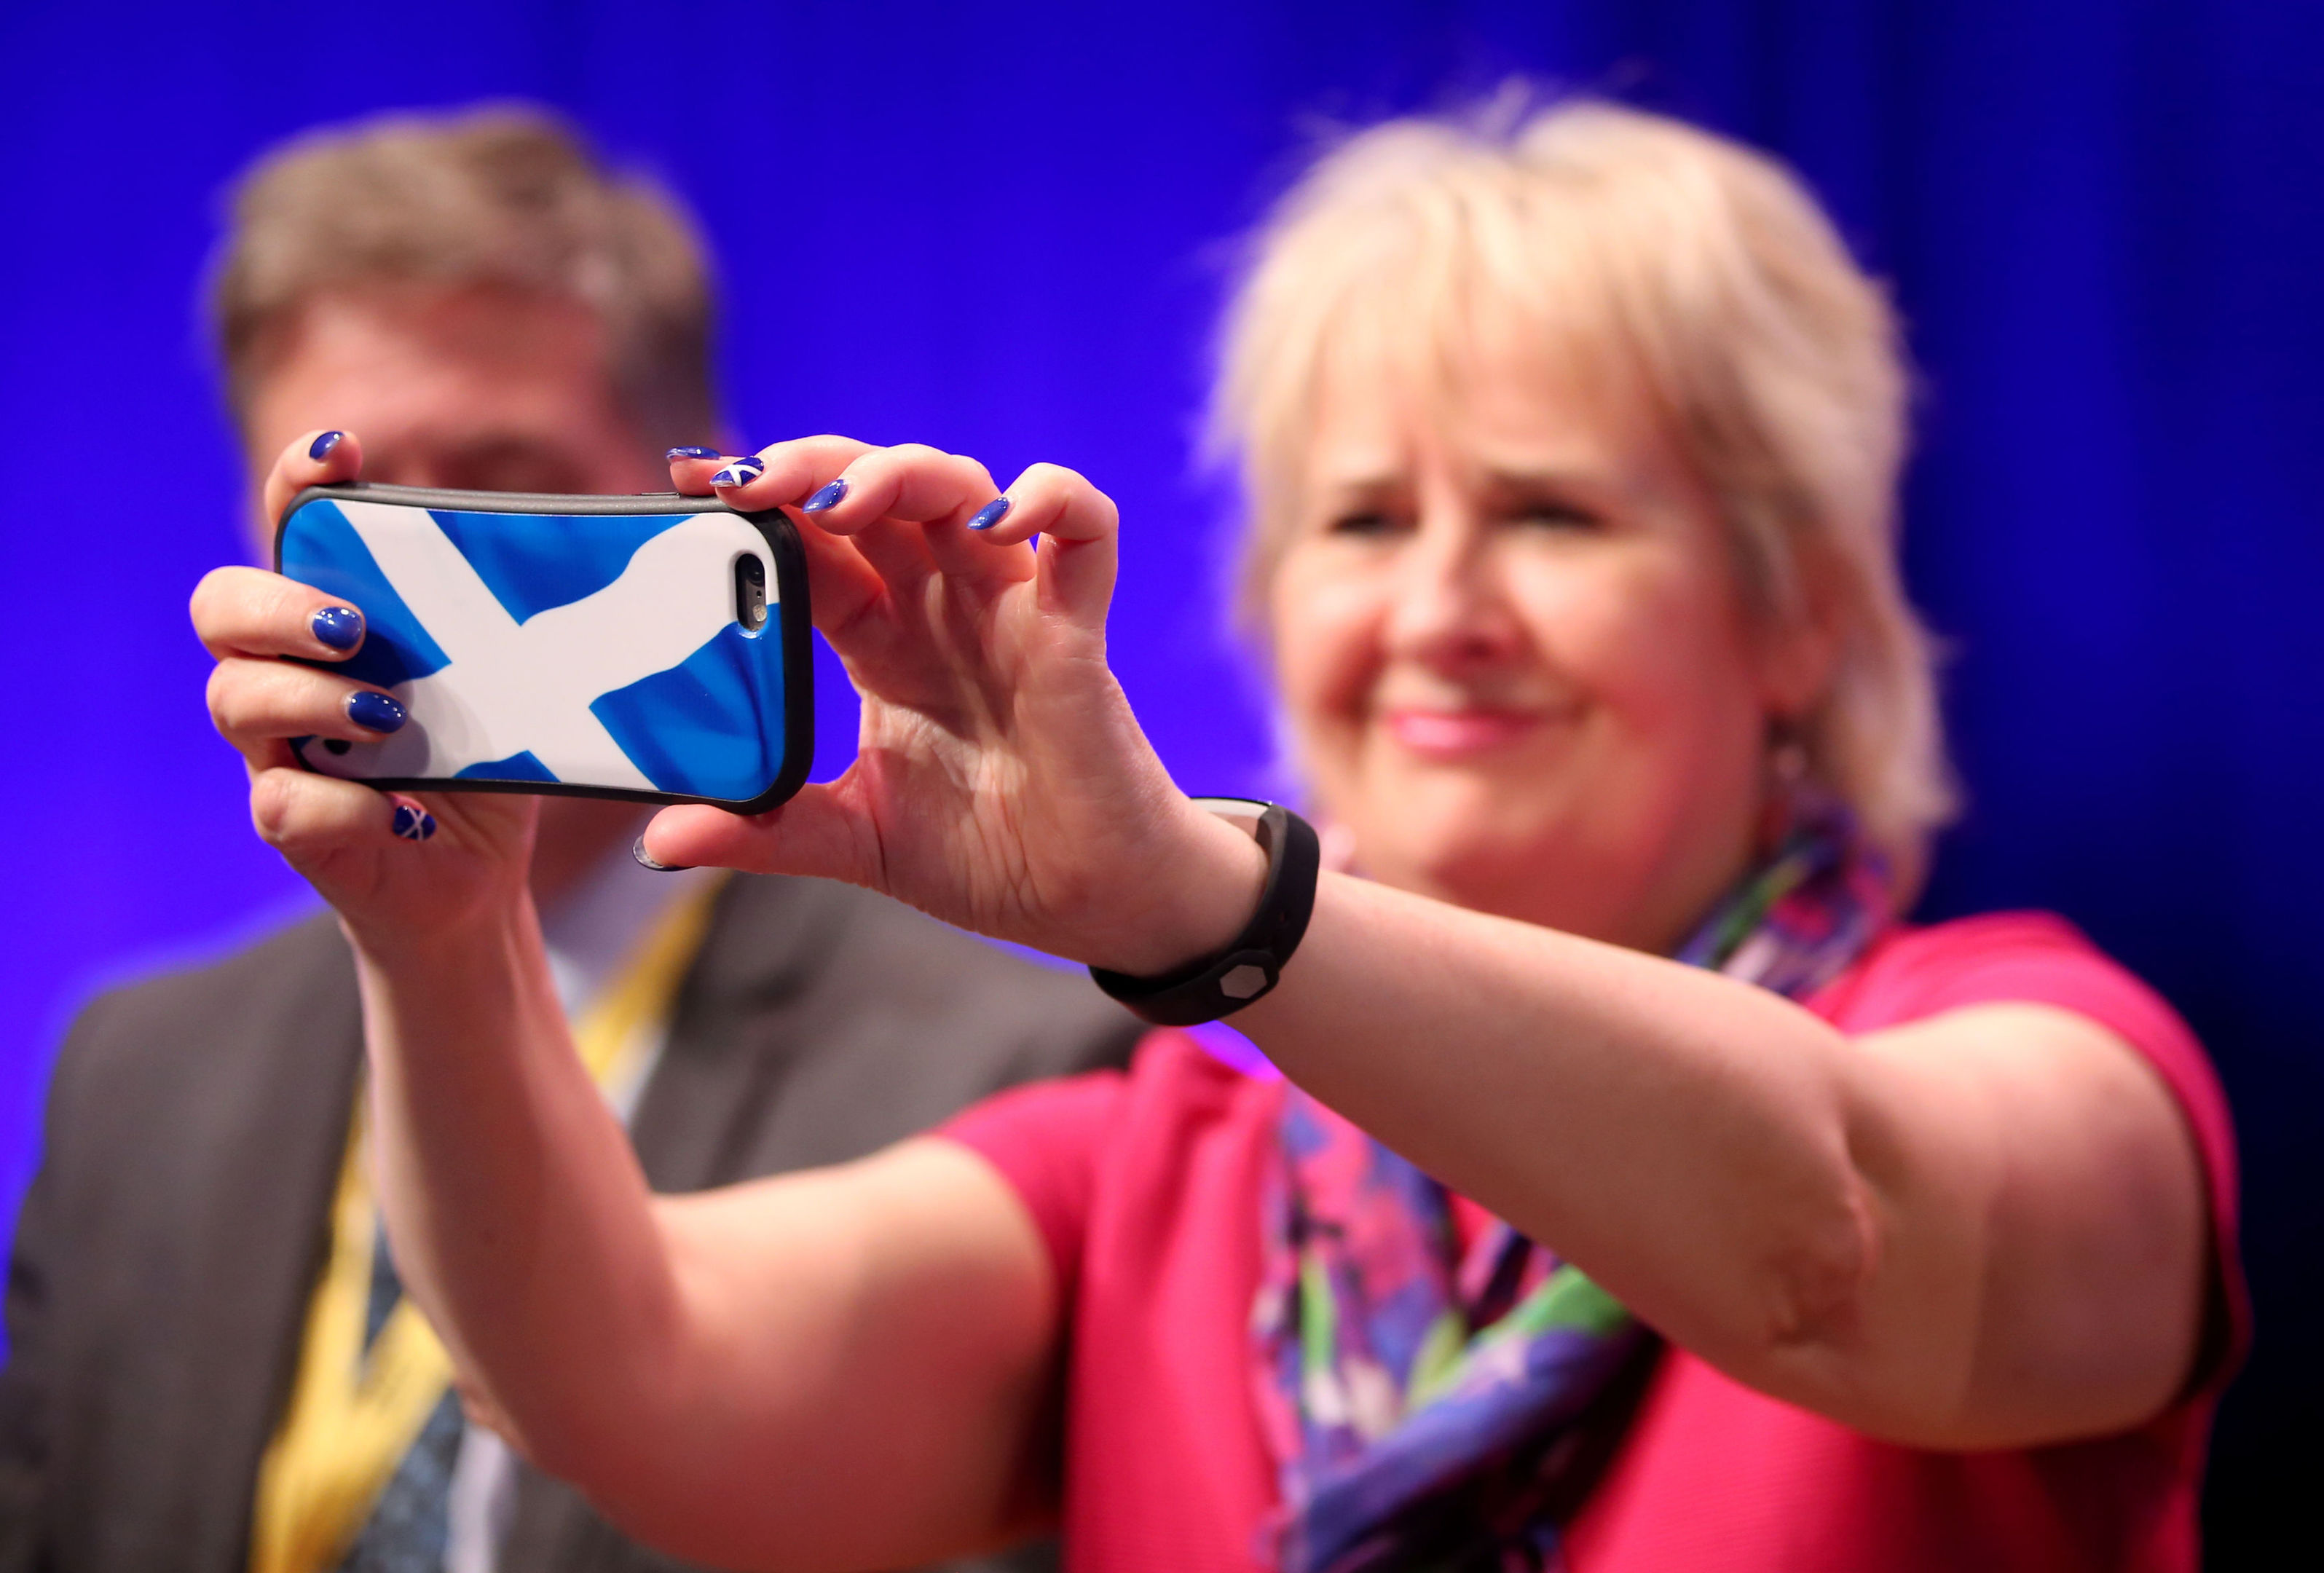 Roseanna Cunningham takes pictures on her phone as First Minister Nicola Sturgeon delivers her keynote speech at the Scottish National Party conference at the SEC Centre in Glasgow.